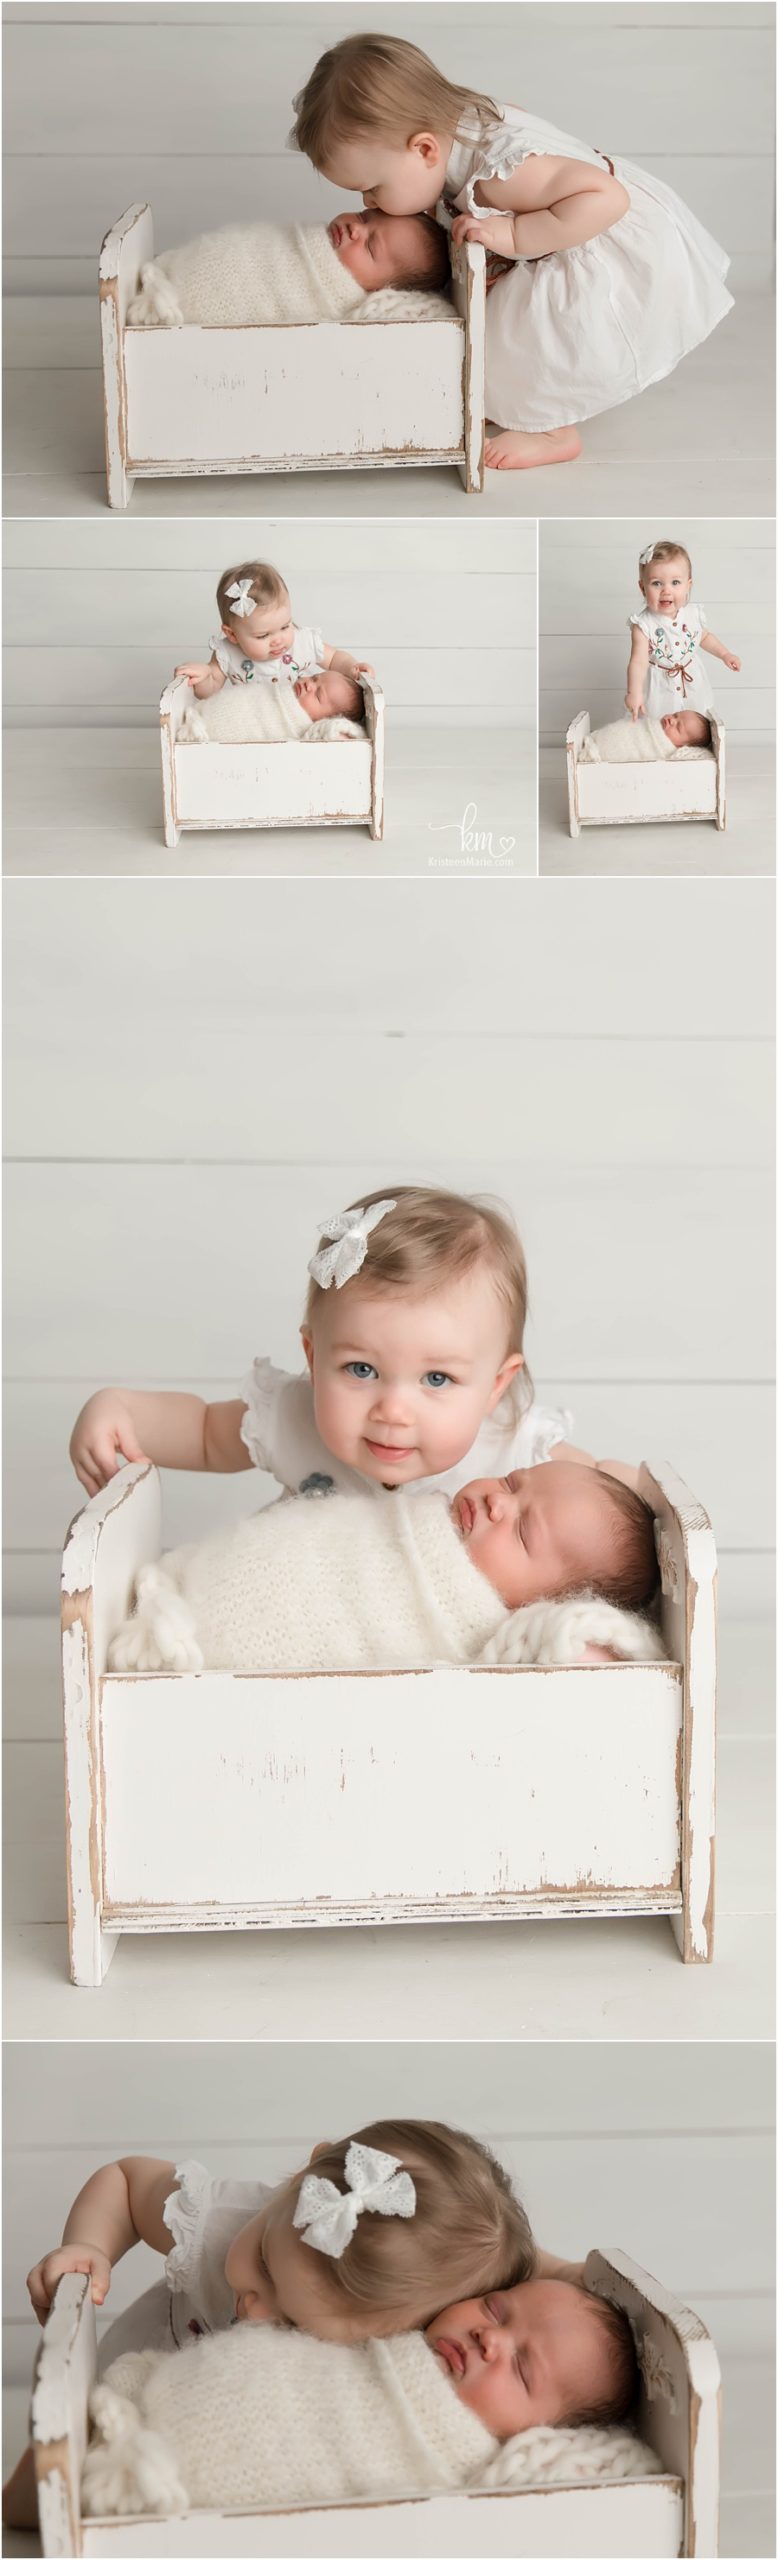 one year old and newborn baby - Indianapolis photographer